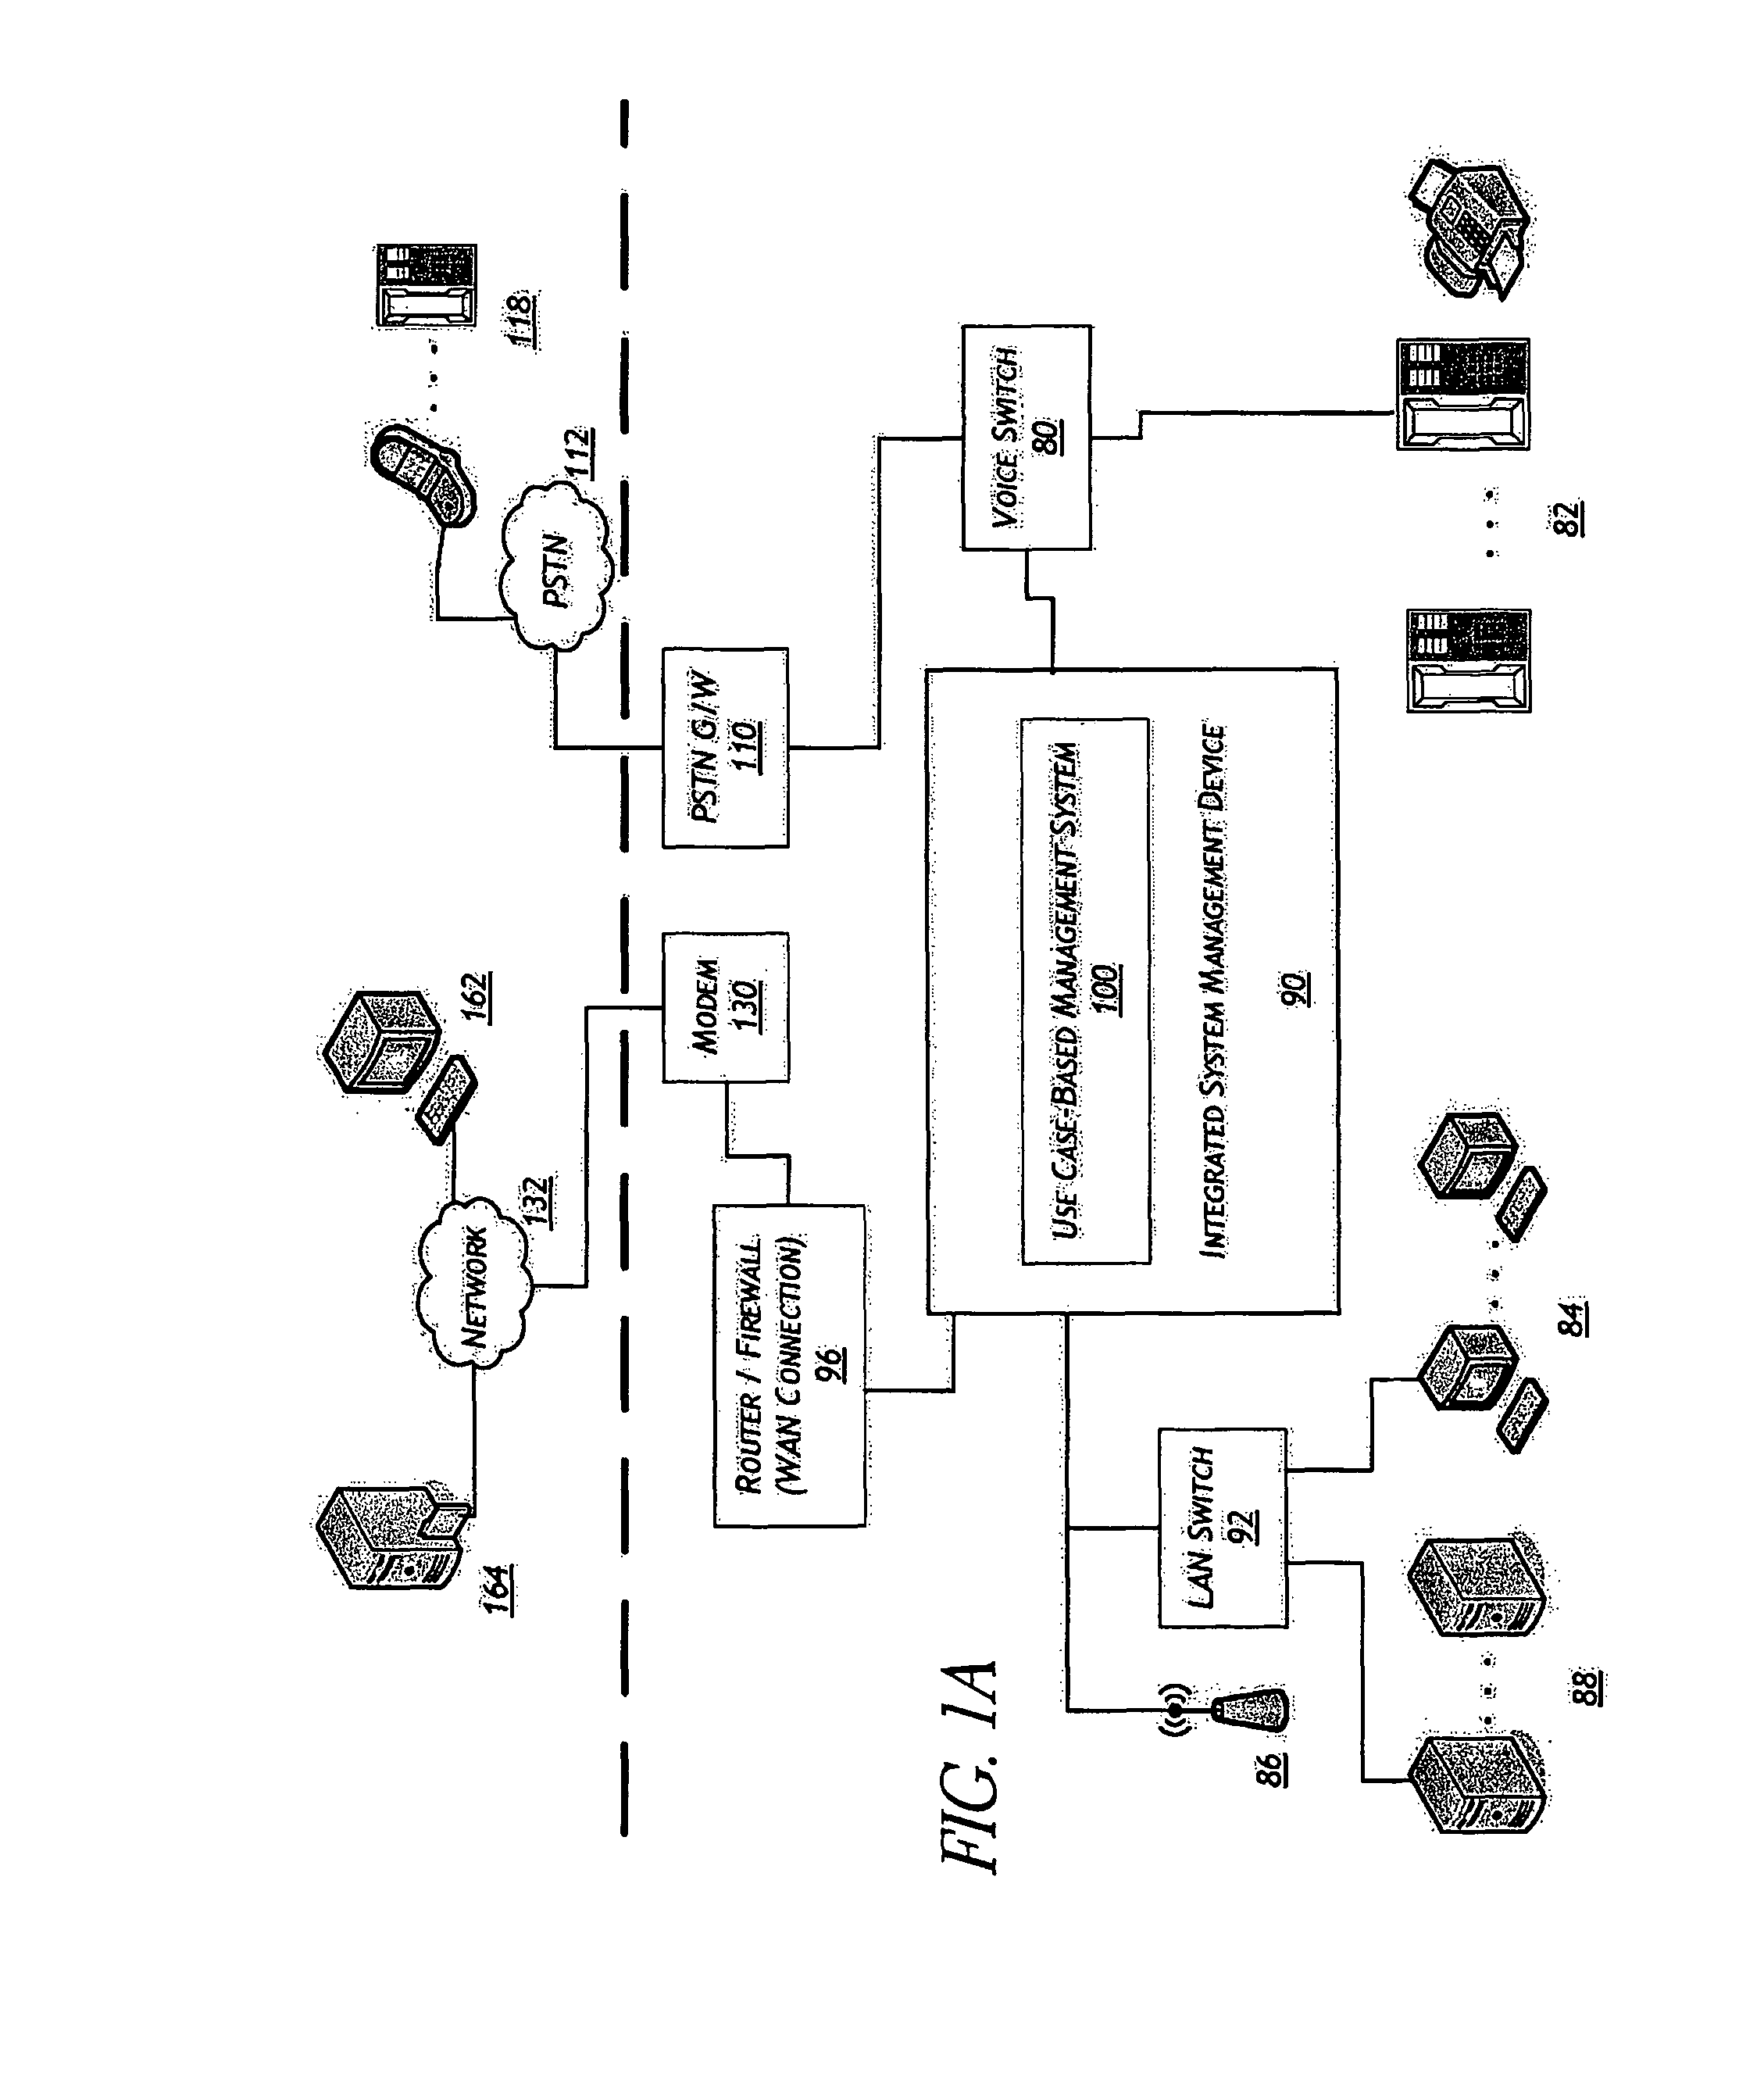 Systems and methods for managing integrated systems with use cases